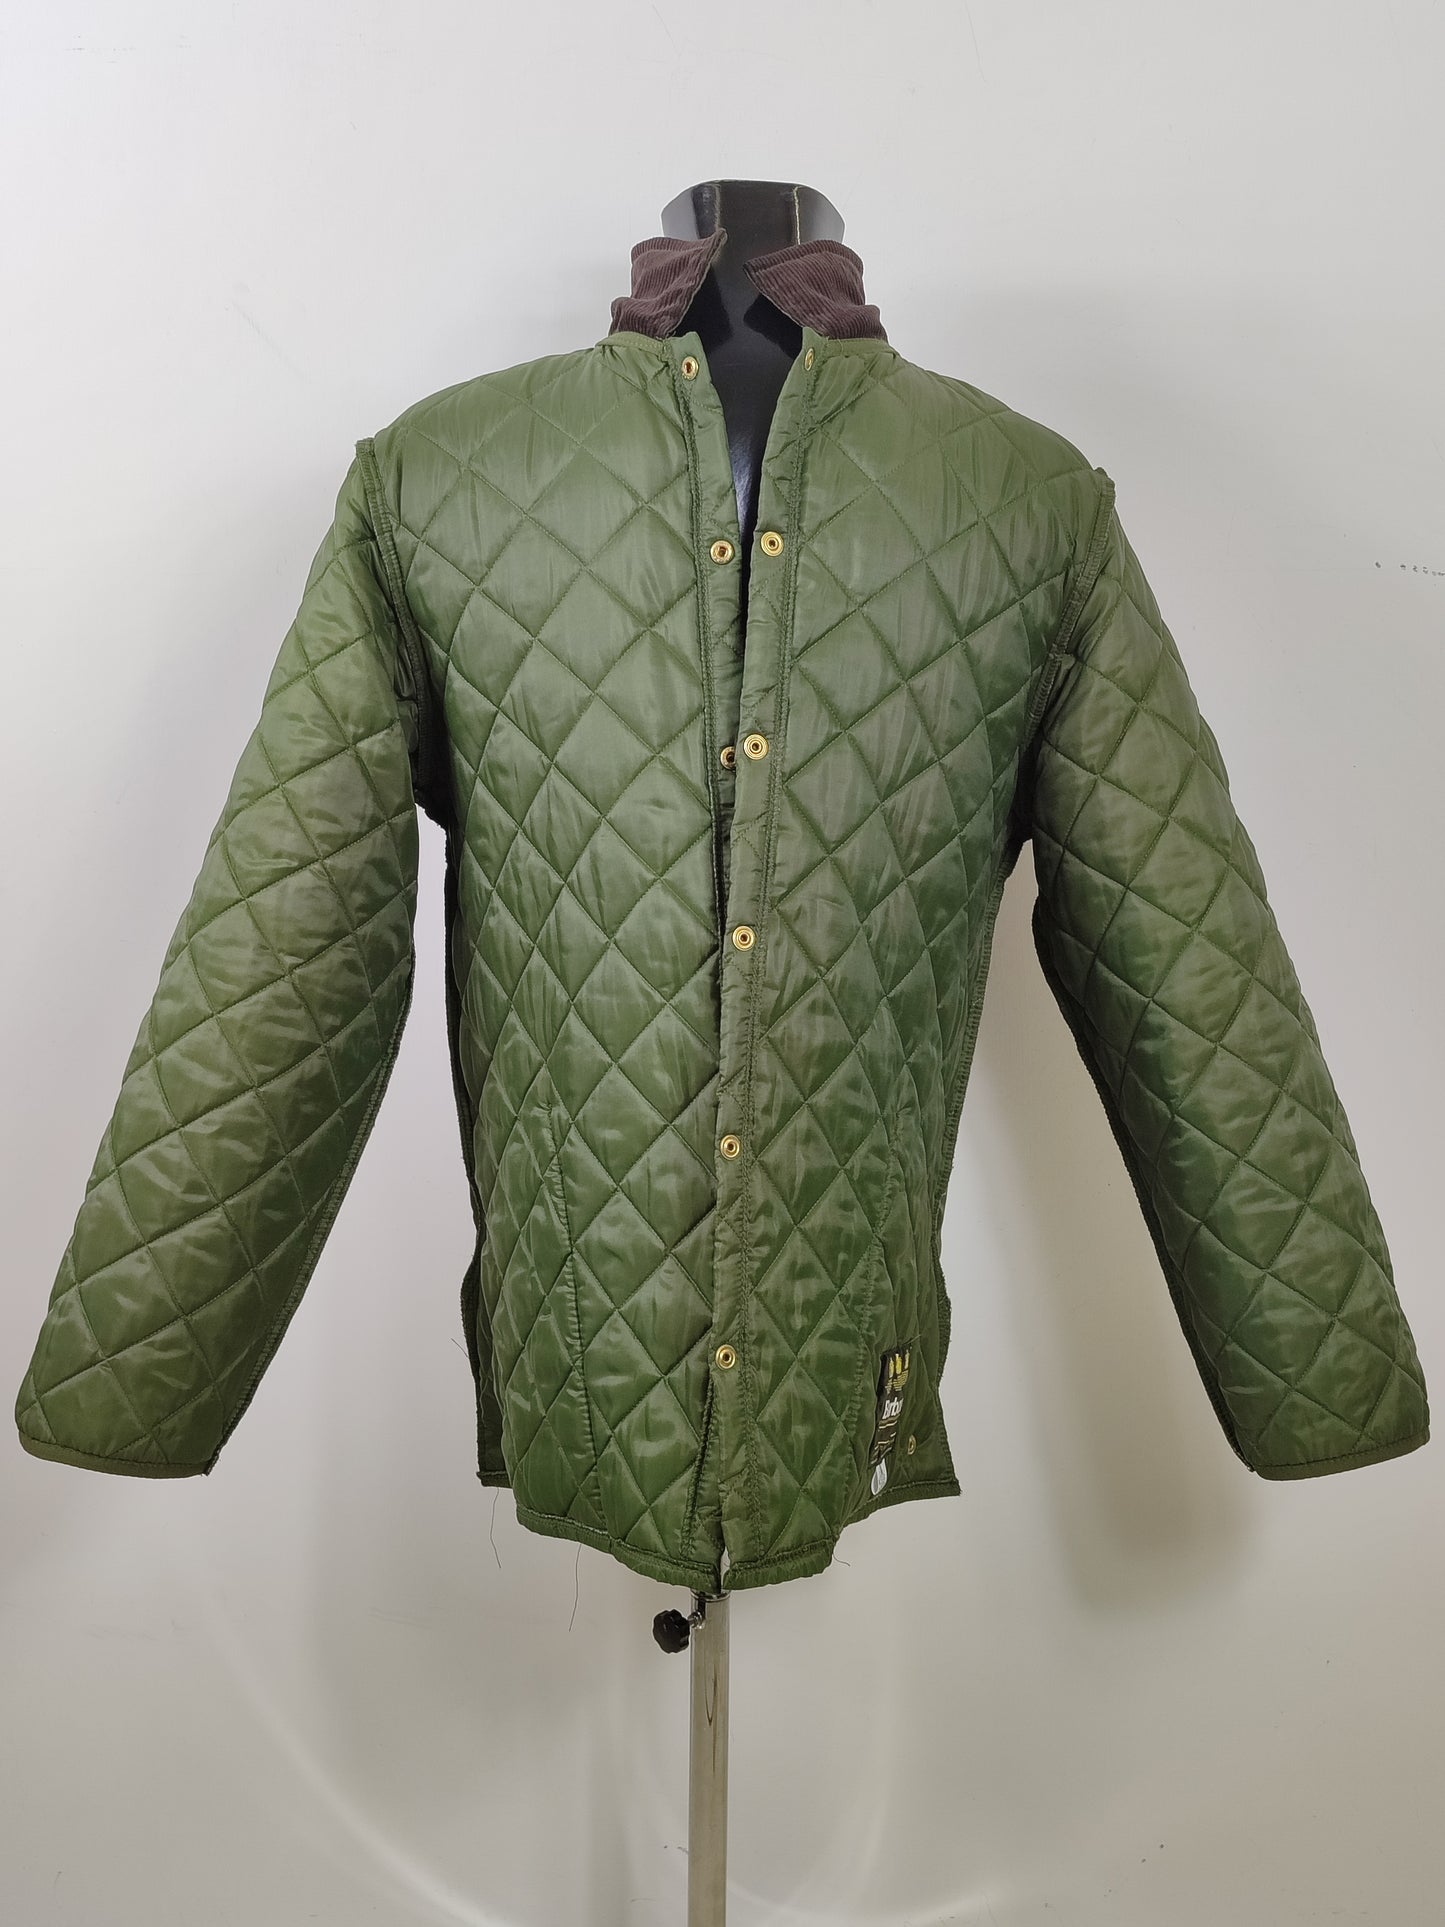 Giacca a vento Barbour verde Liddesdale Small - Quilted Man Green Jacket Size Small